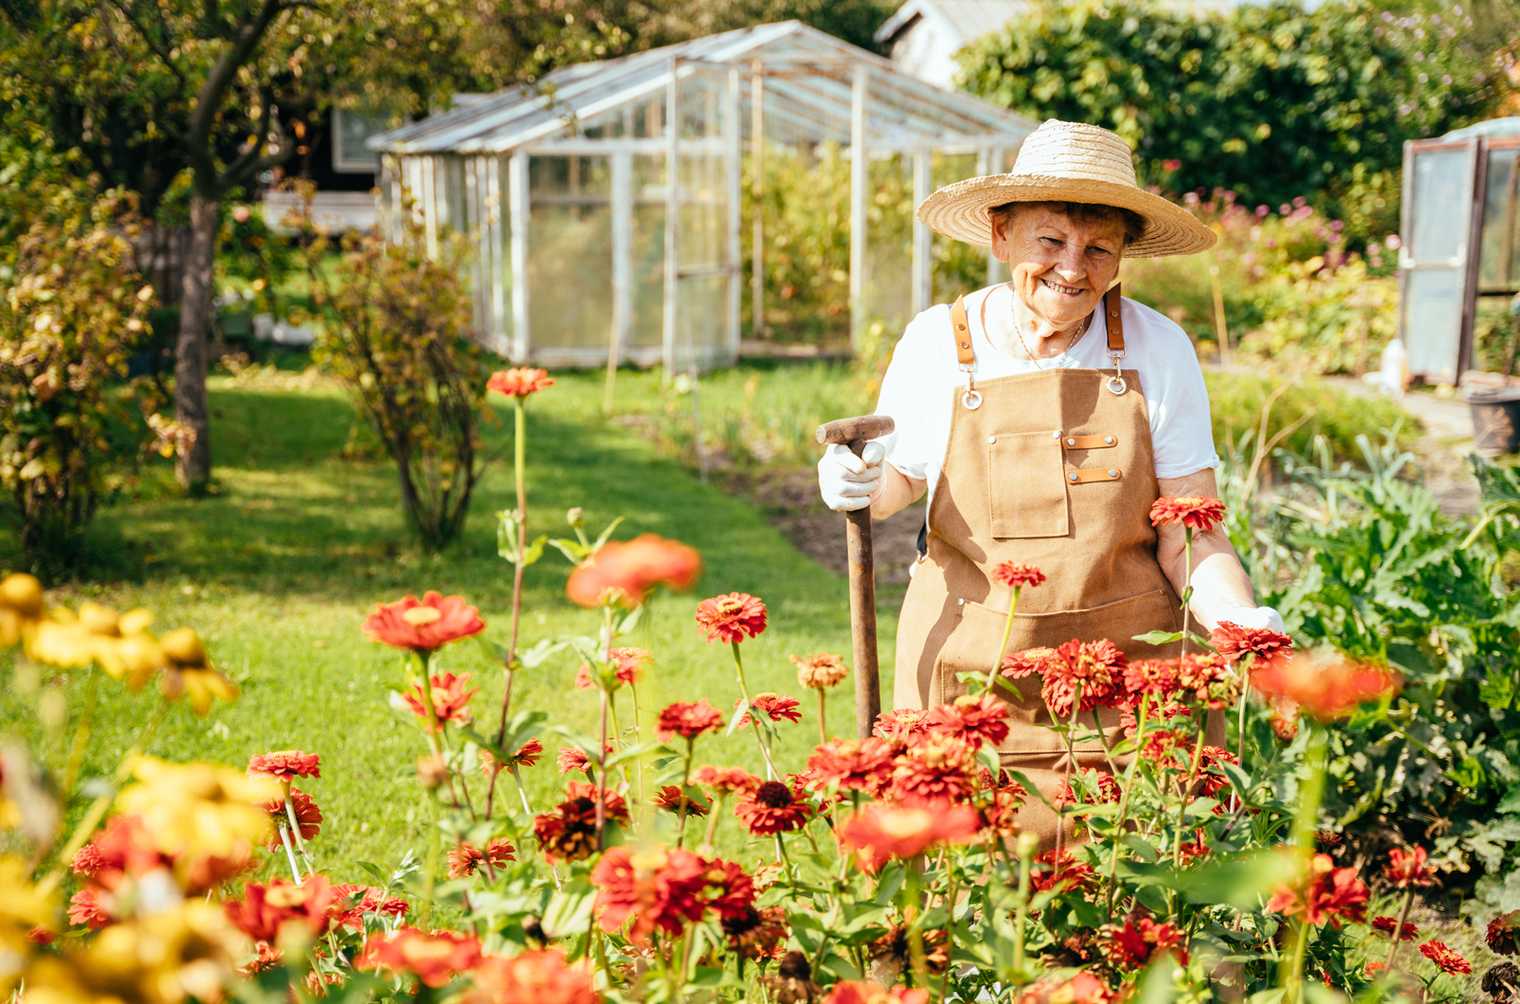 An older person in her garden with a greenhouse in the background